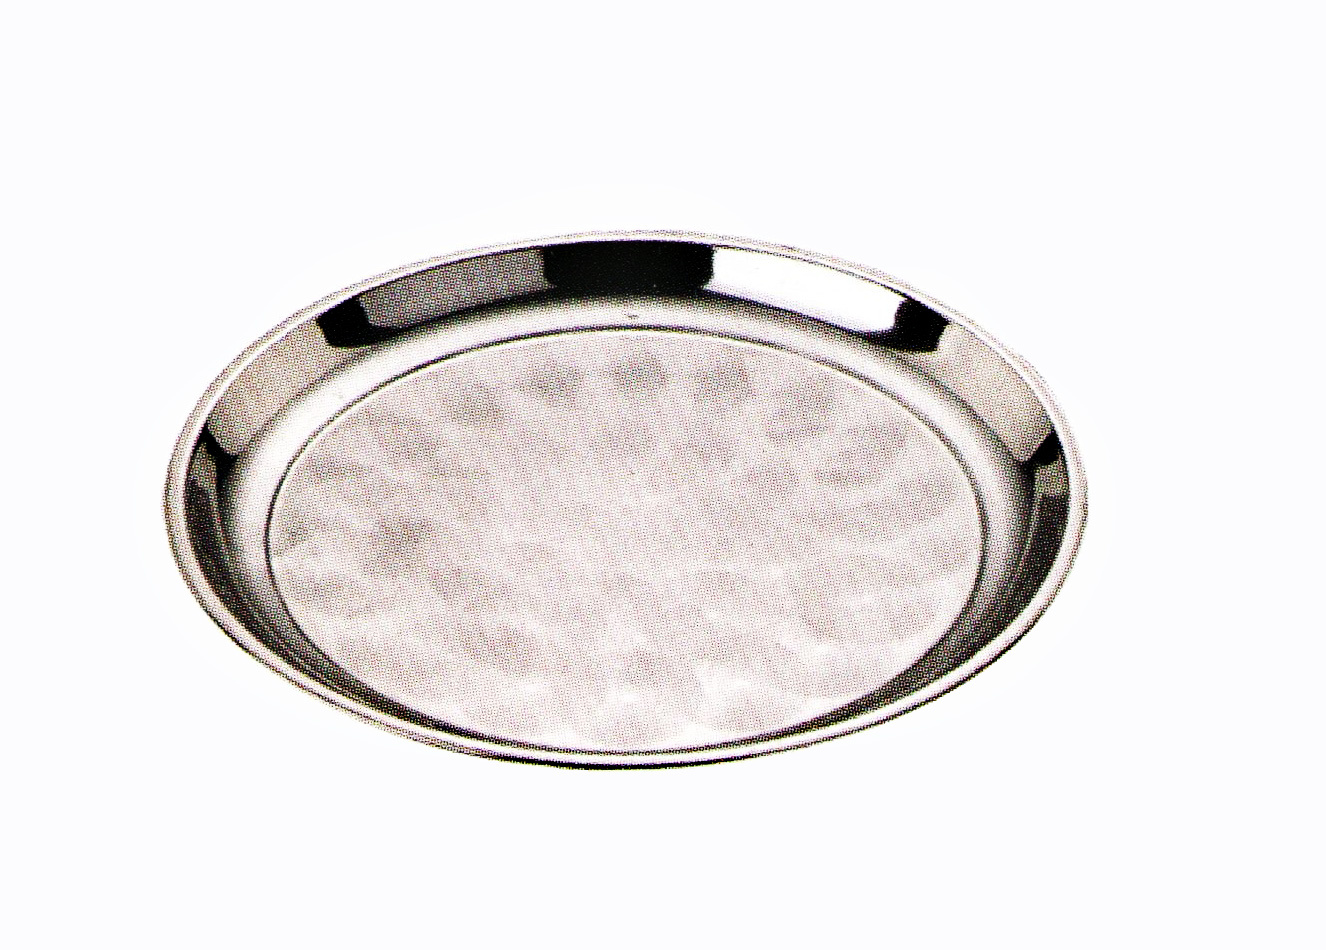 PriceList for Stainless Steel Handpan -
 Stainless Steel Kitchenware Decorative Pattern Round Plate Tray / Dinner Plate Sp026 – Long Prosper